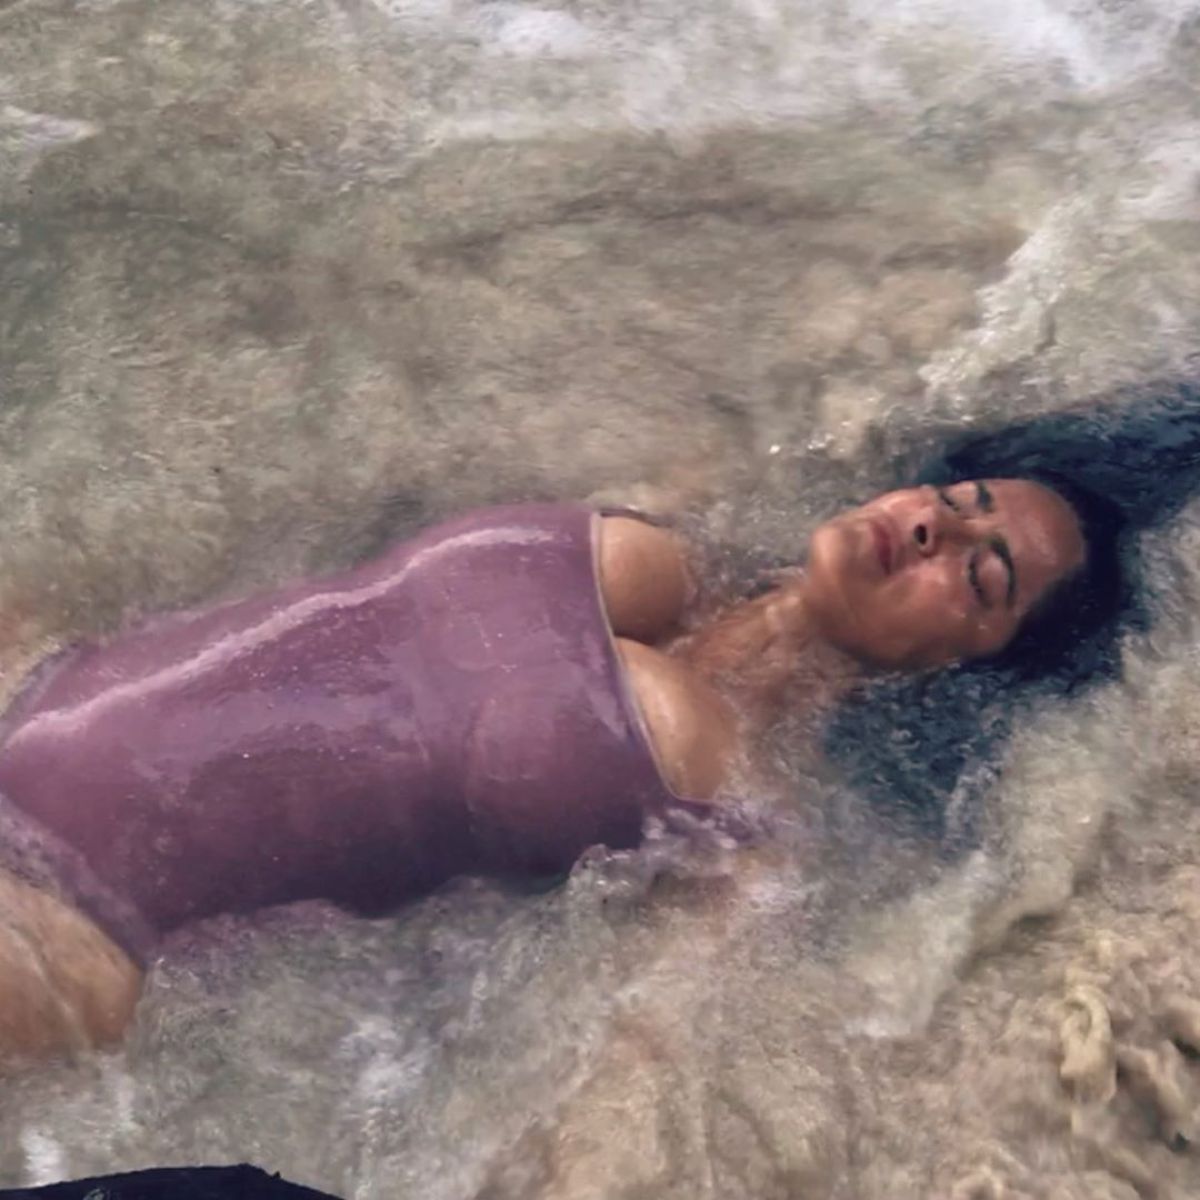 SALMA HAYEK in Swimsuit Rrelaxing at a Beach 08/20/2019 Instagram Pictures.